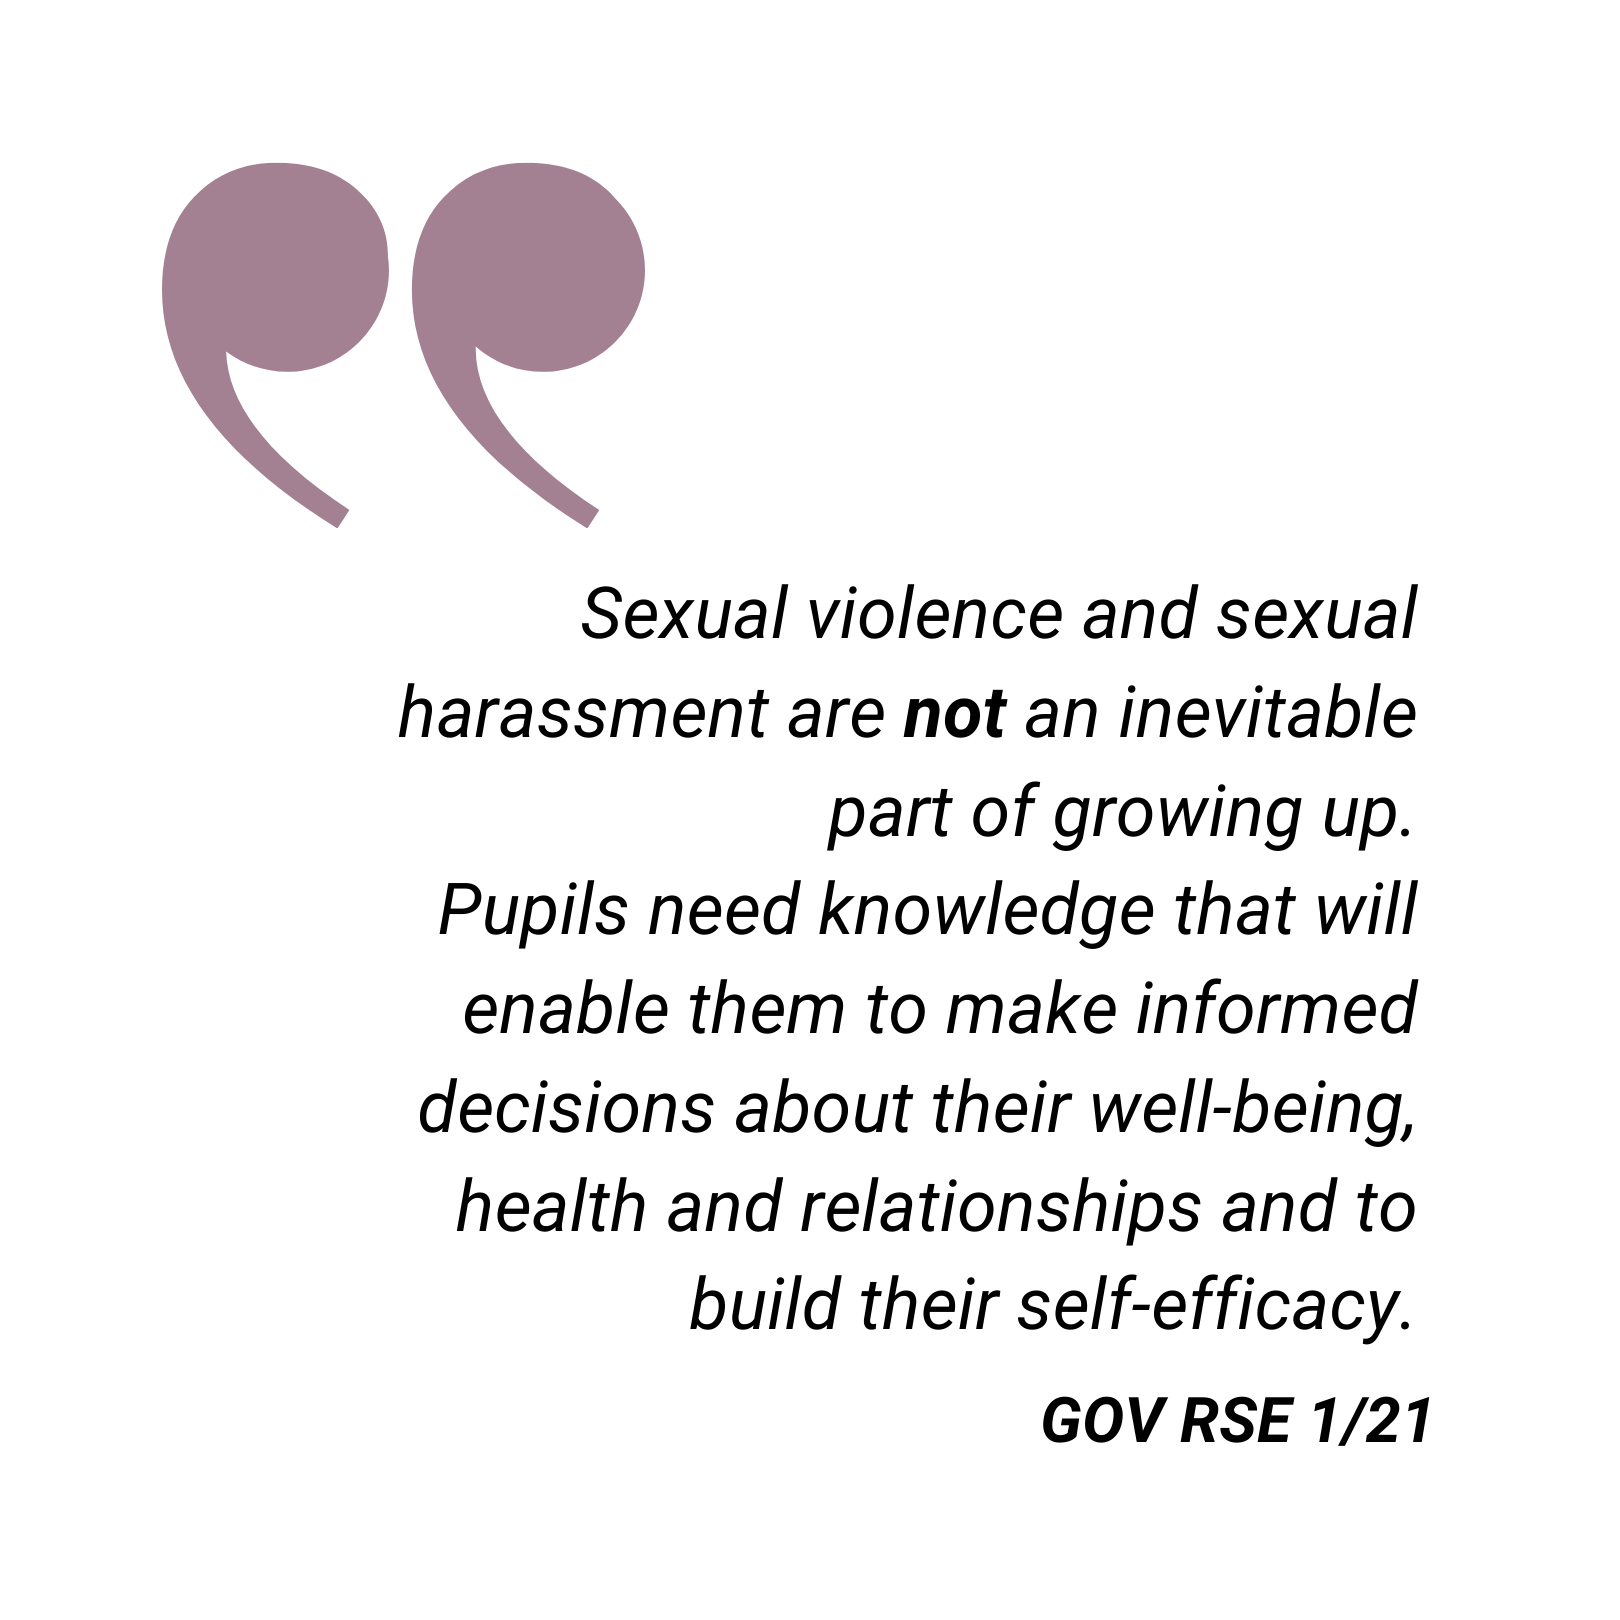 Sexual violence and sexual harassment are not an inevitable part of growing up. Pupils need knowledge that will enable them to make informed decisions about their well-being, health and relationships and to build their self-efficacy.